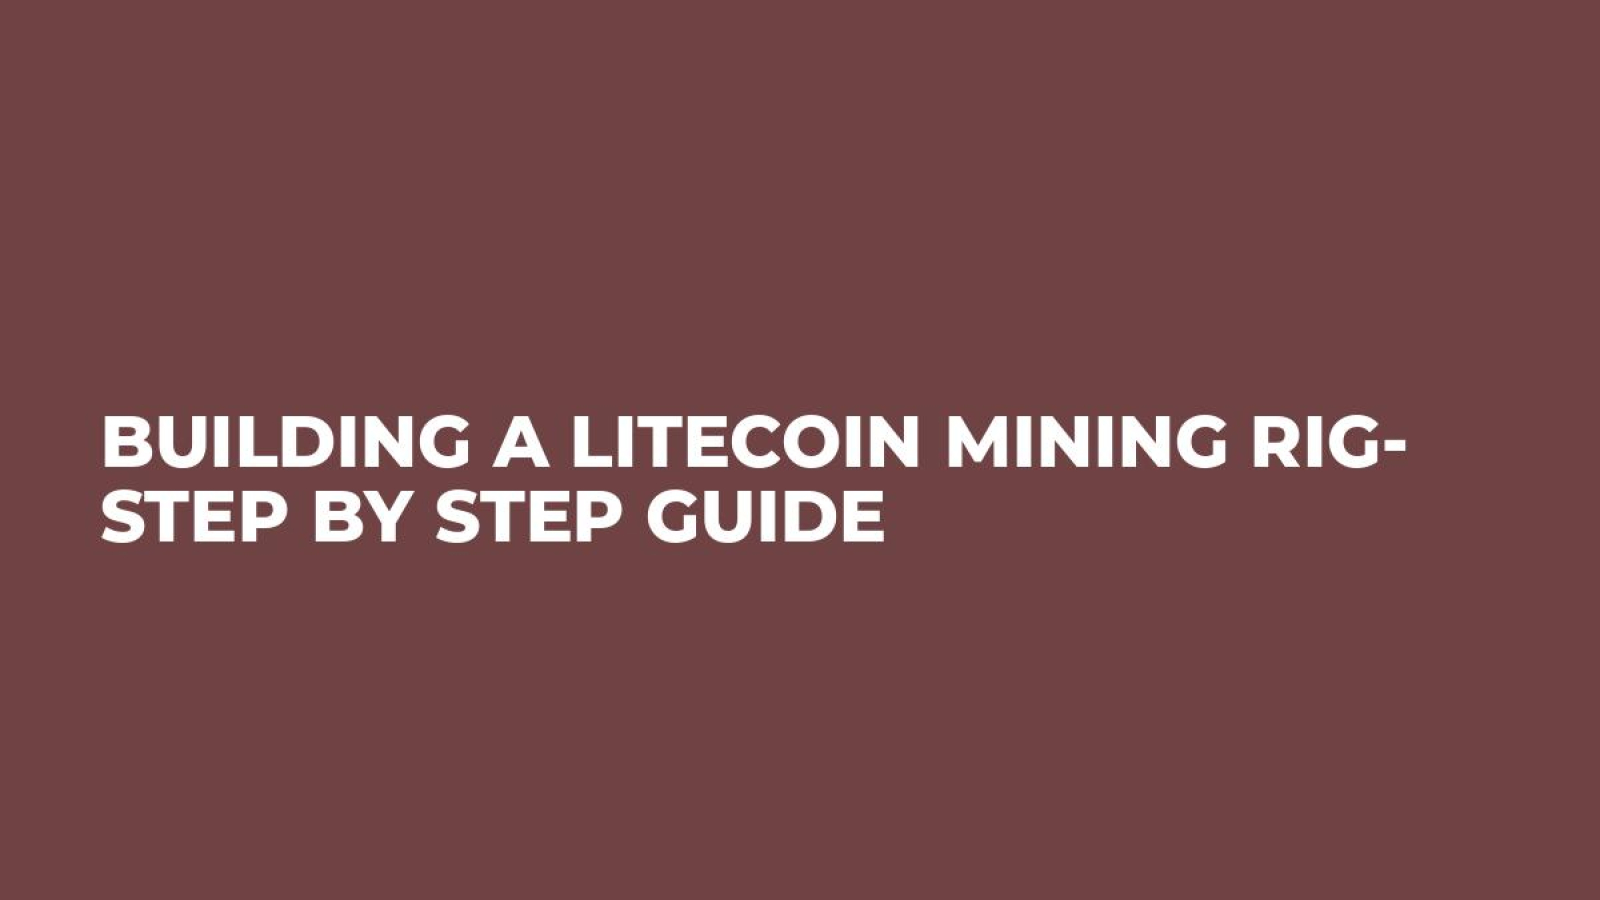 Building a Litecoin Mining Rig- Step by Step Guide